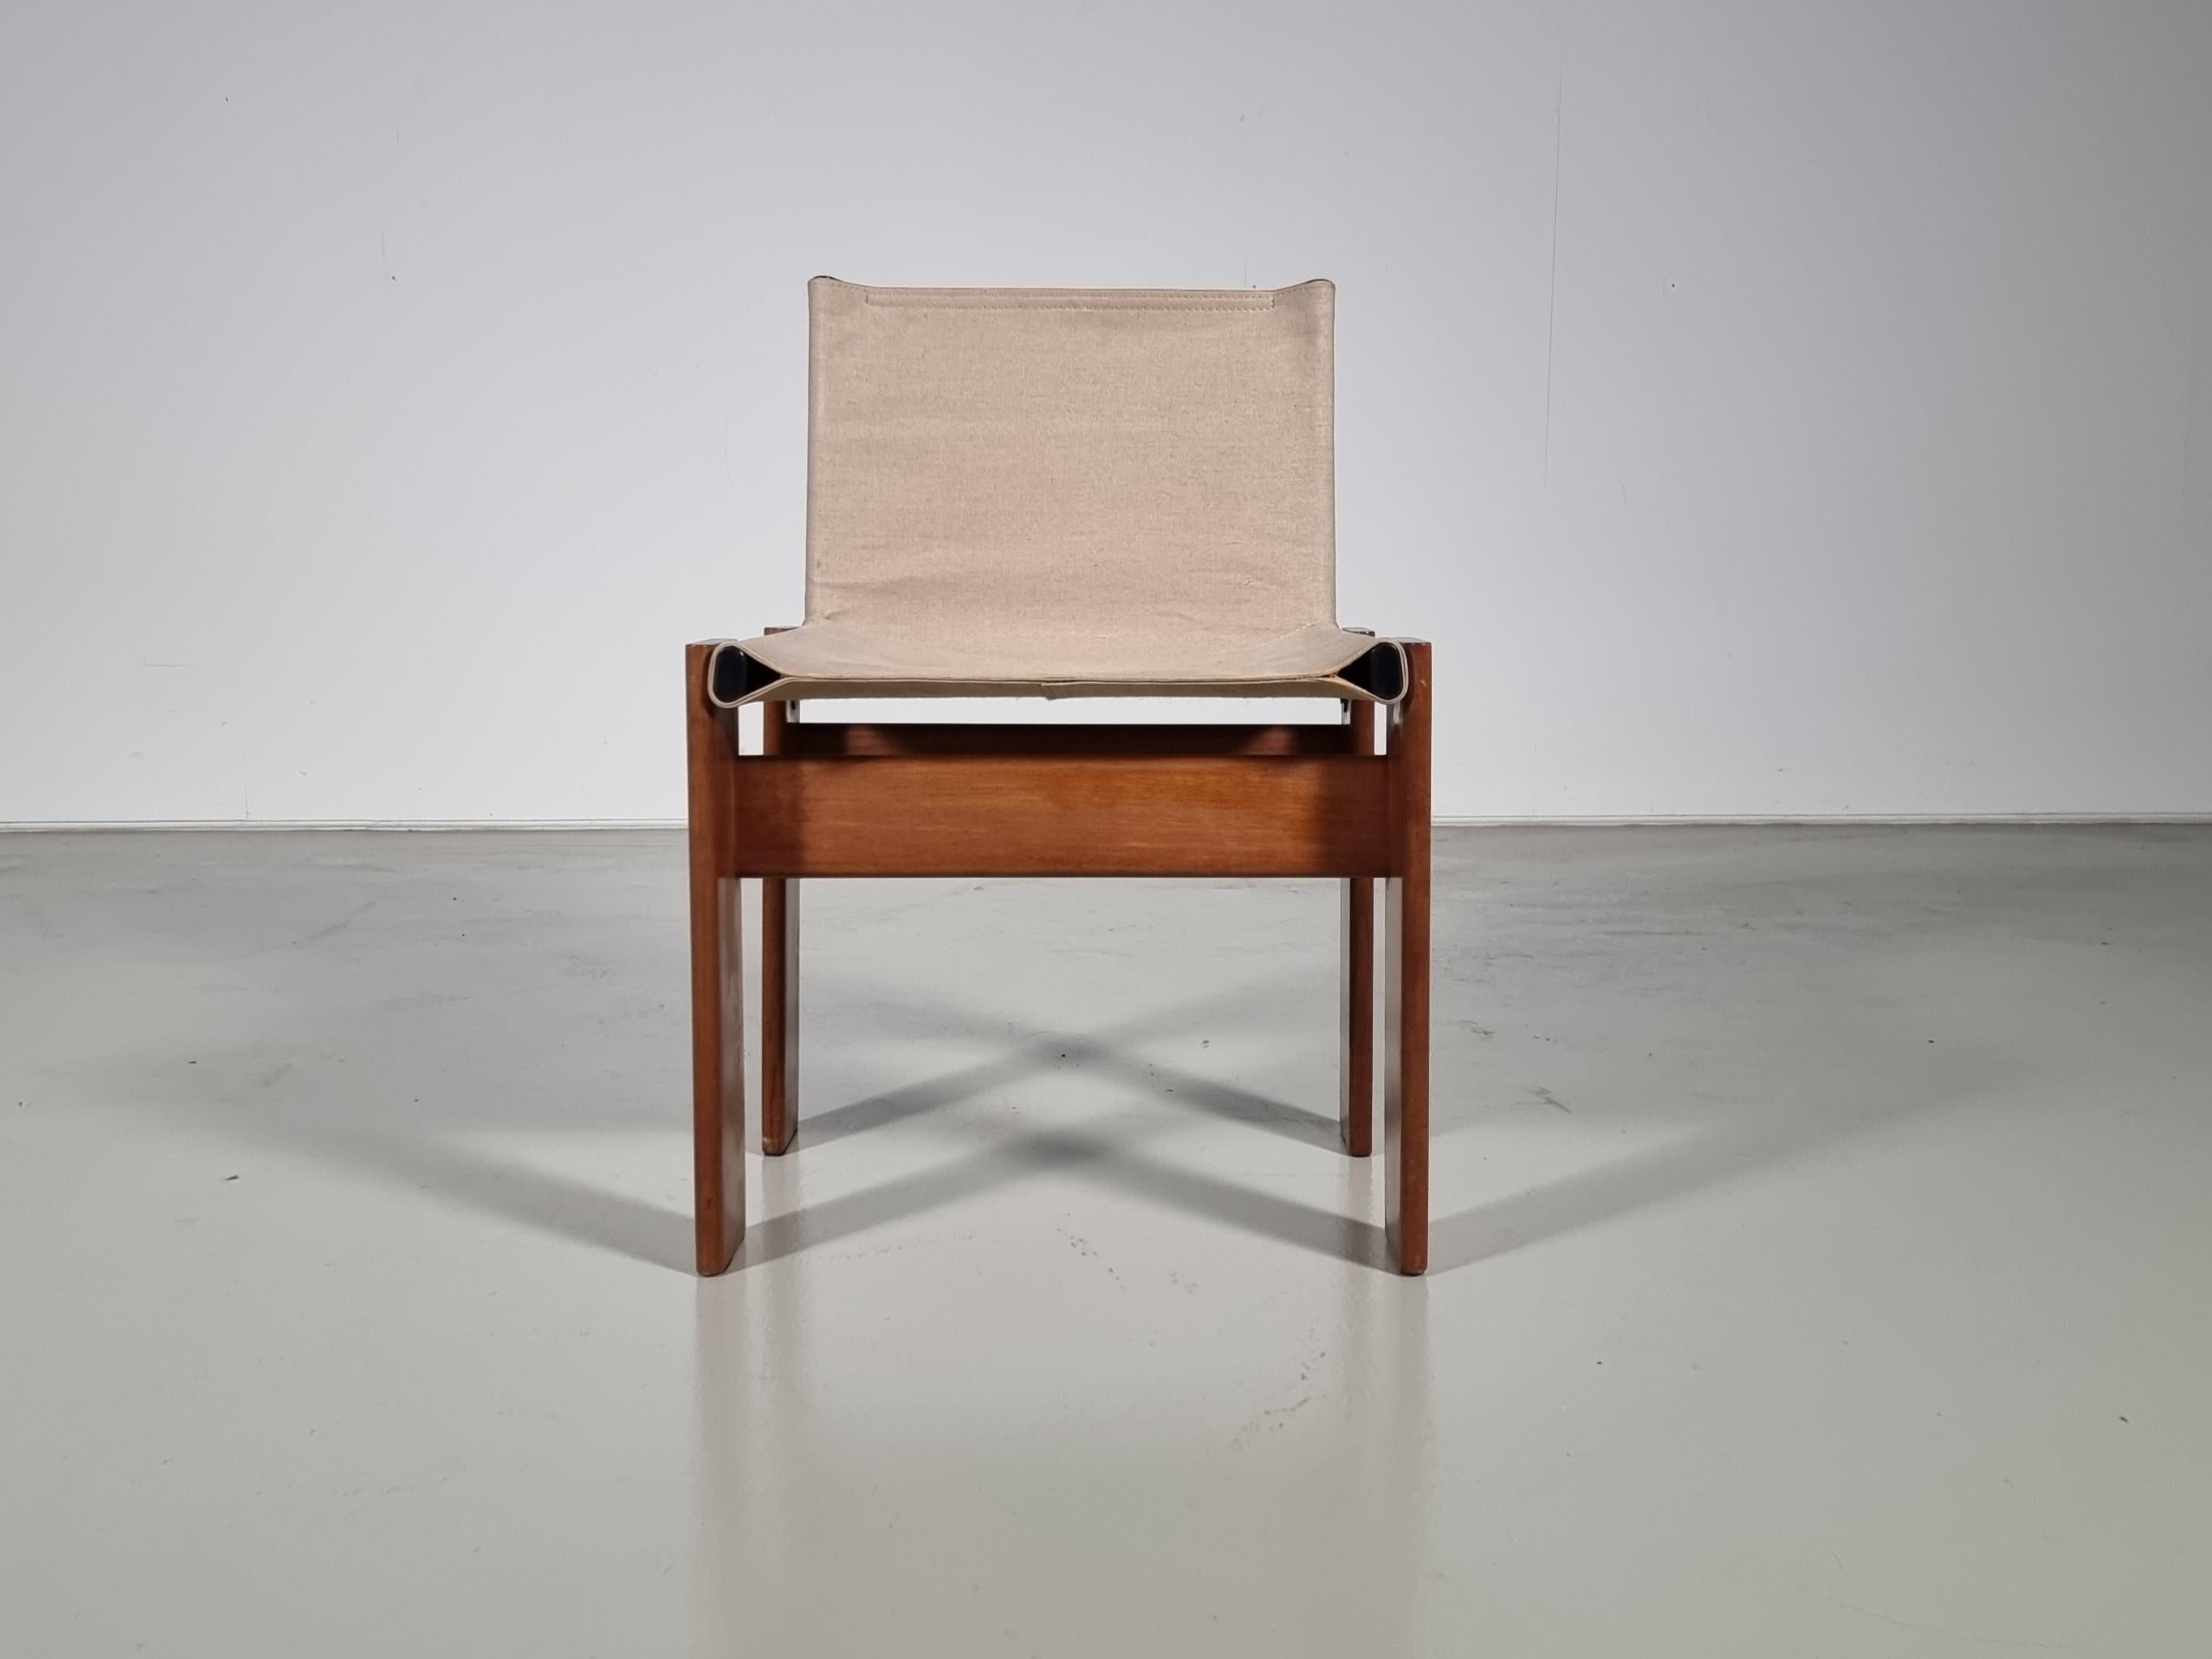 European Afra & Tobia Scarpa 'Monk' Chair in Canvas, 1970s